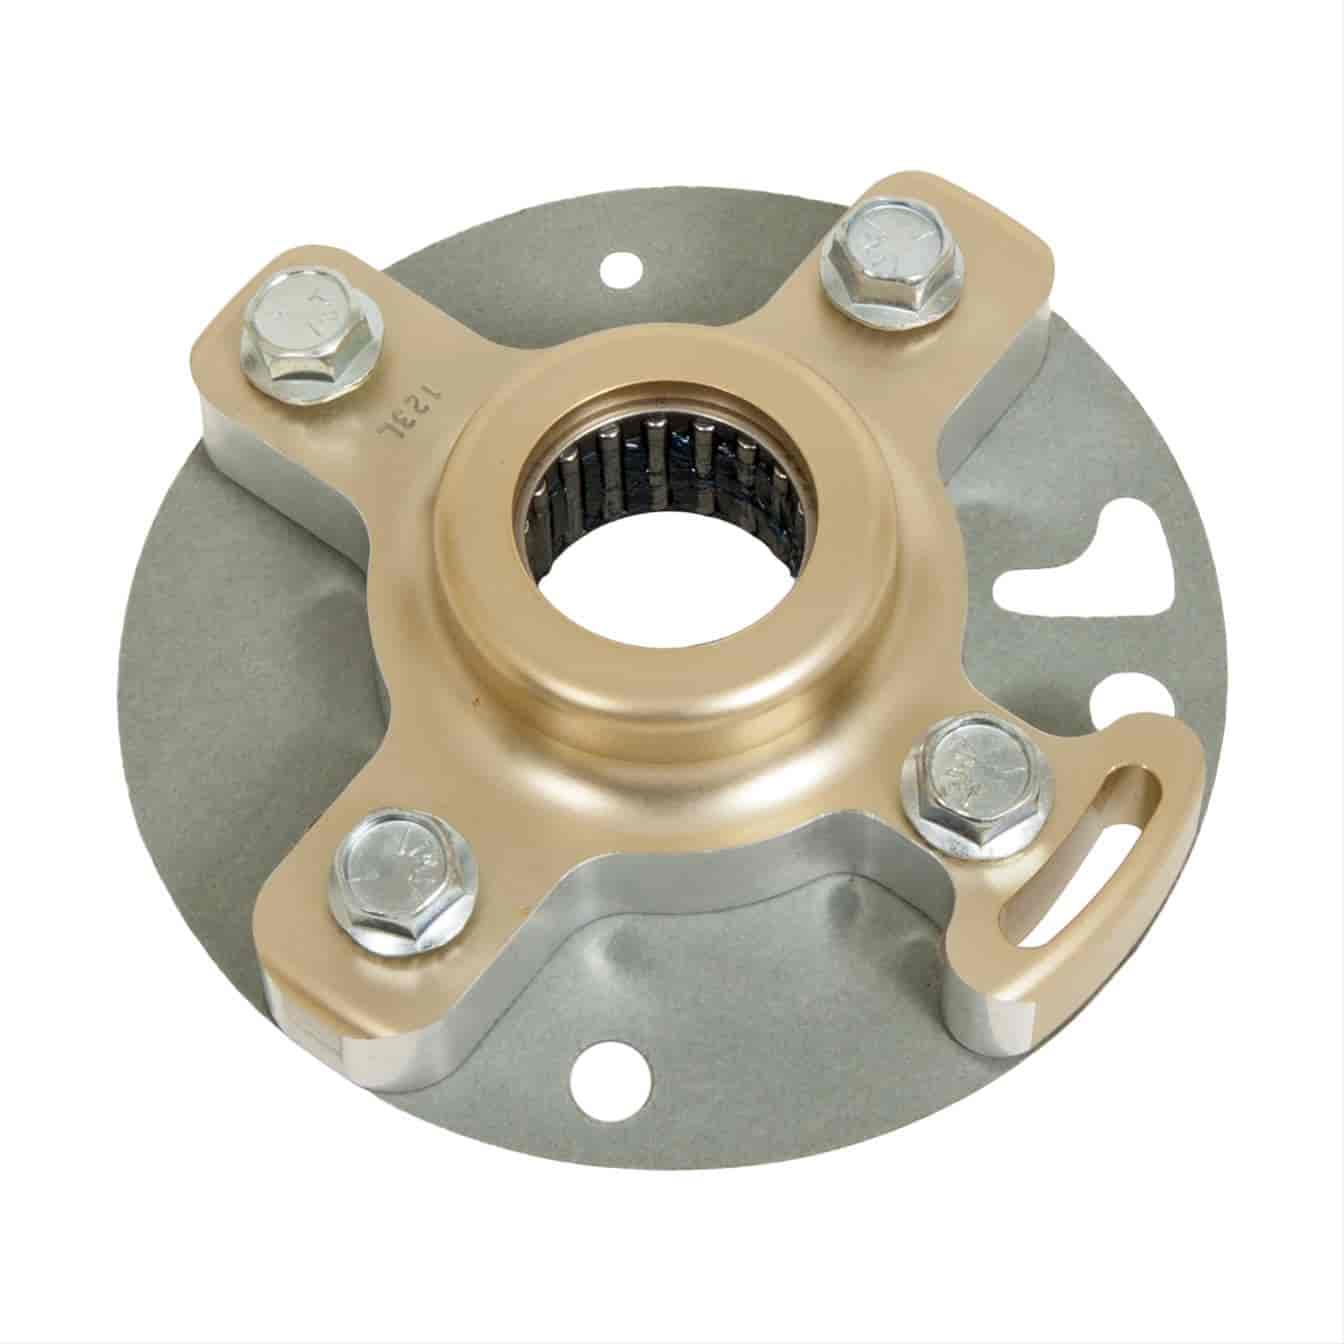 Billet Aluminum Governor Support PG Output with Bearing